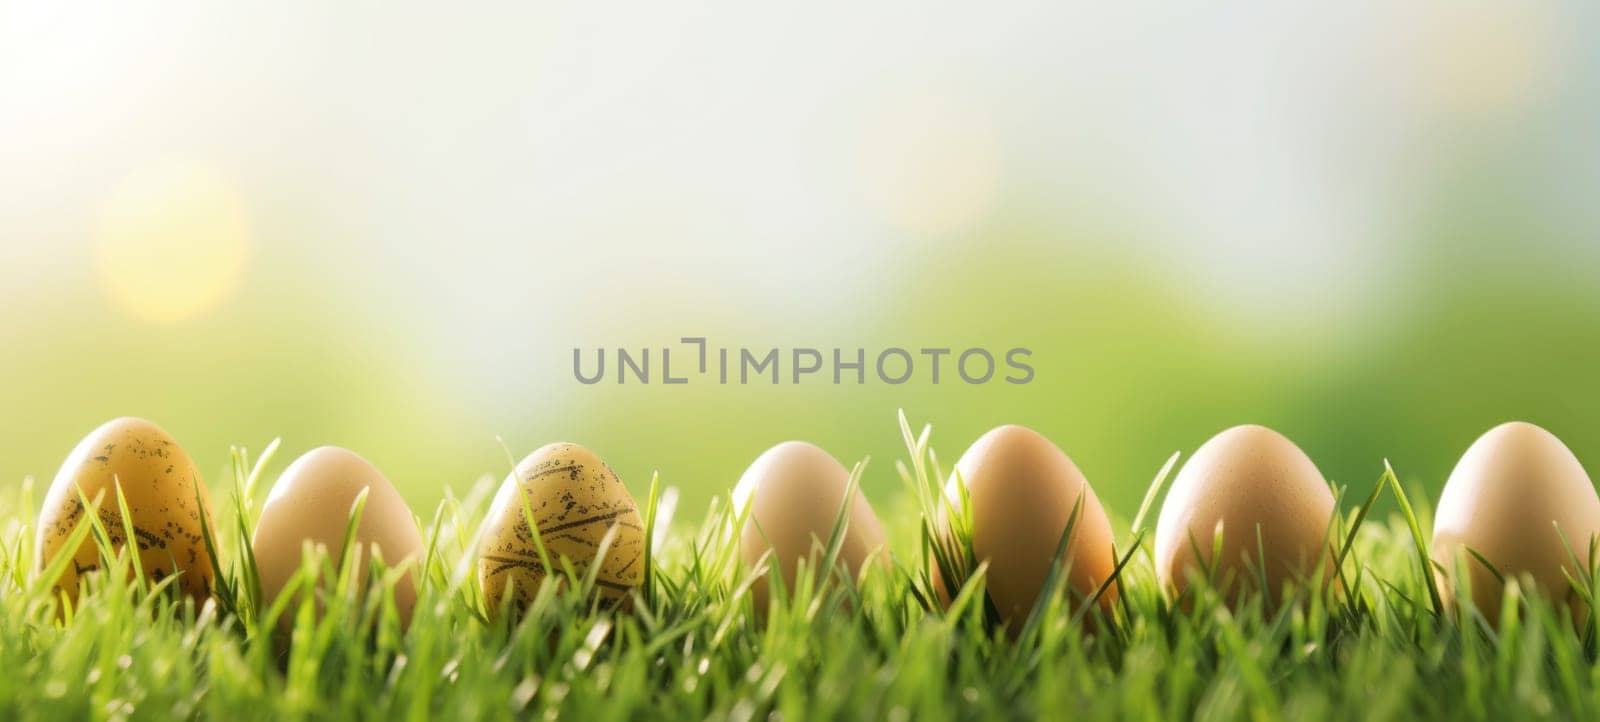 Natural brown Easter eggs with speckles nestled in the vibrant green grass under the soft light of spring, evoking a peaceful Easter setting.